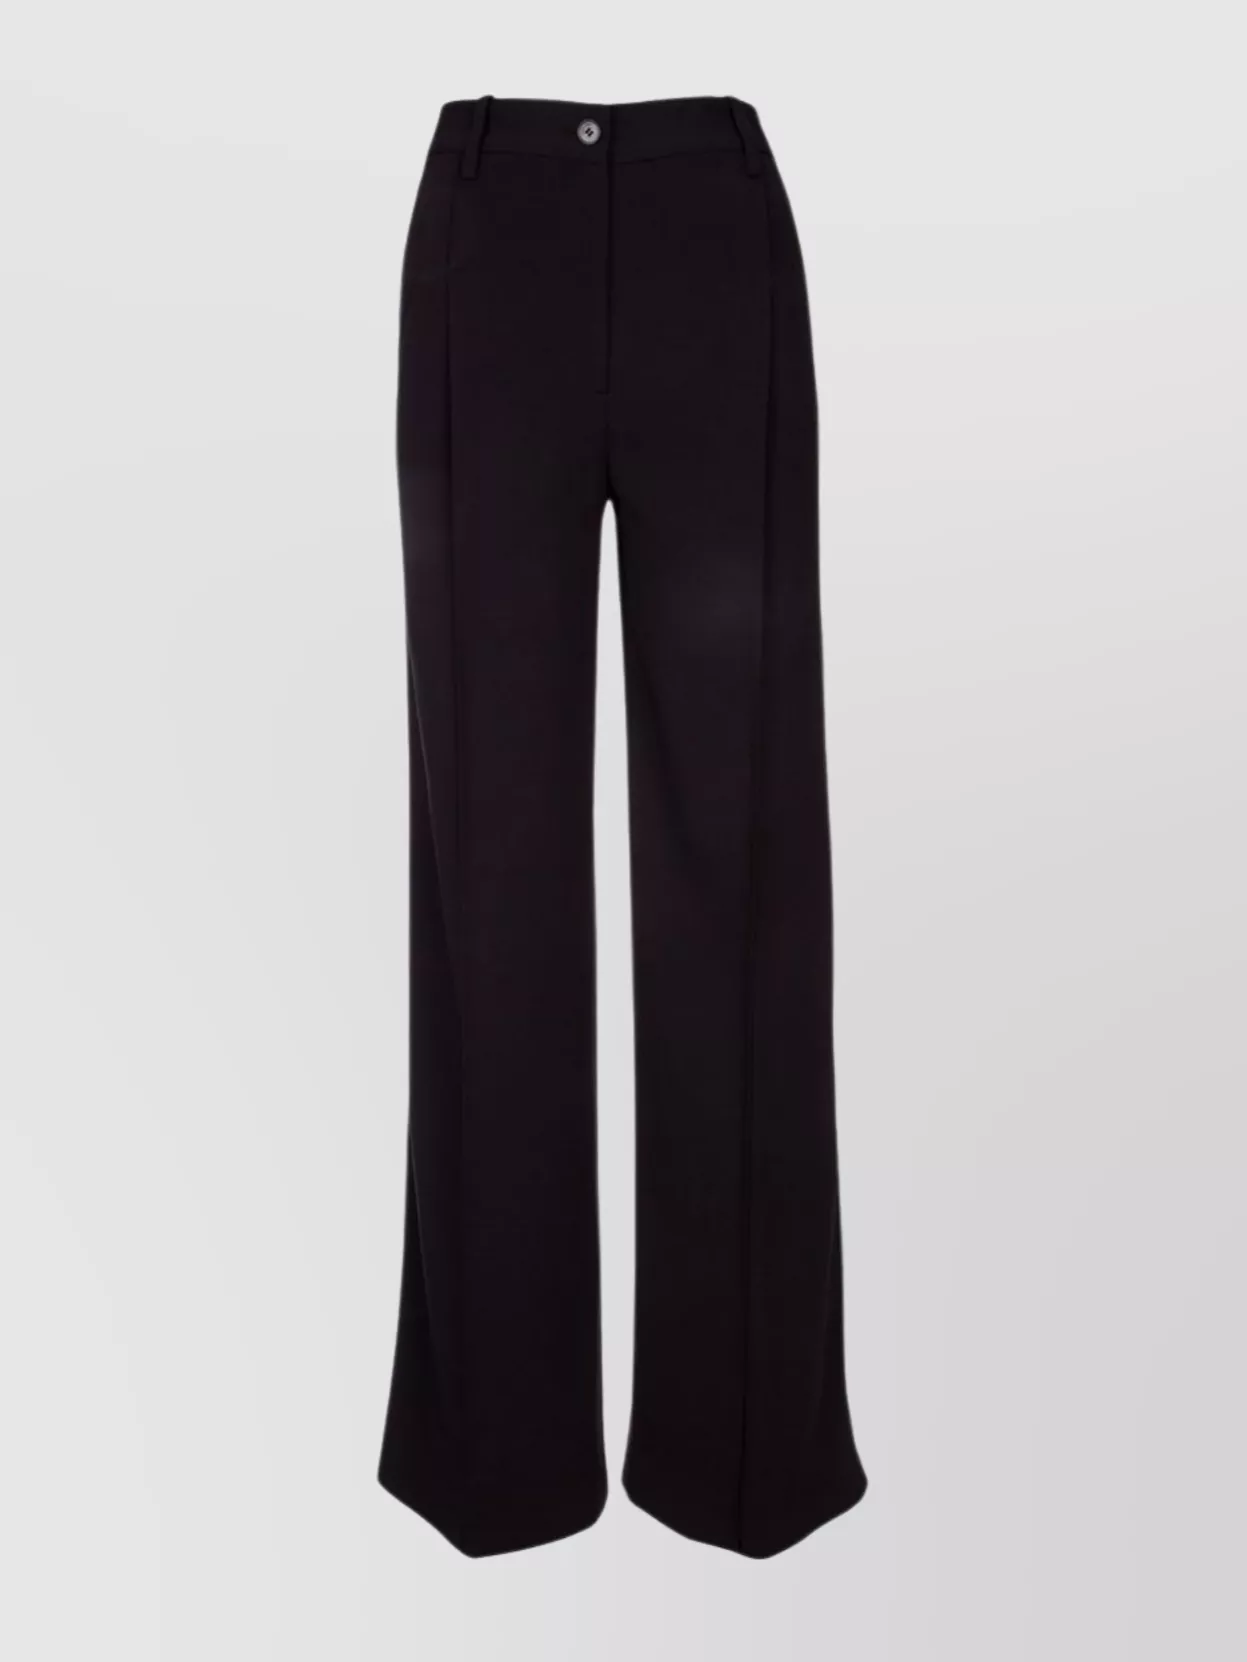 Shop Calvin Klein Wide Leg Trousers With Belt Loops And Back Pockets